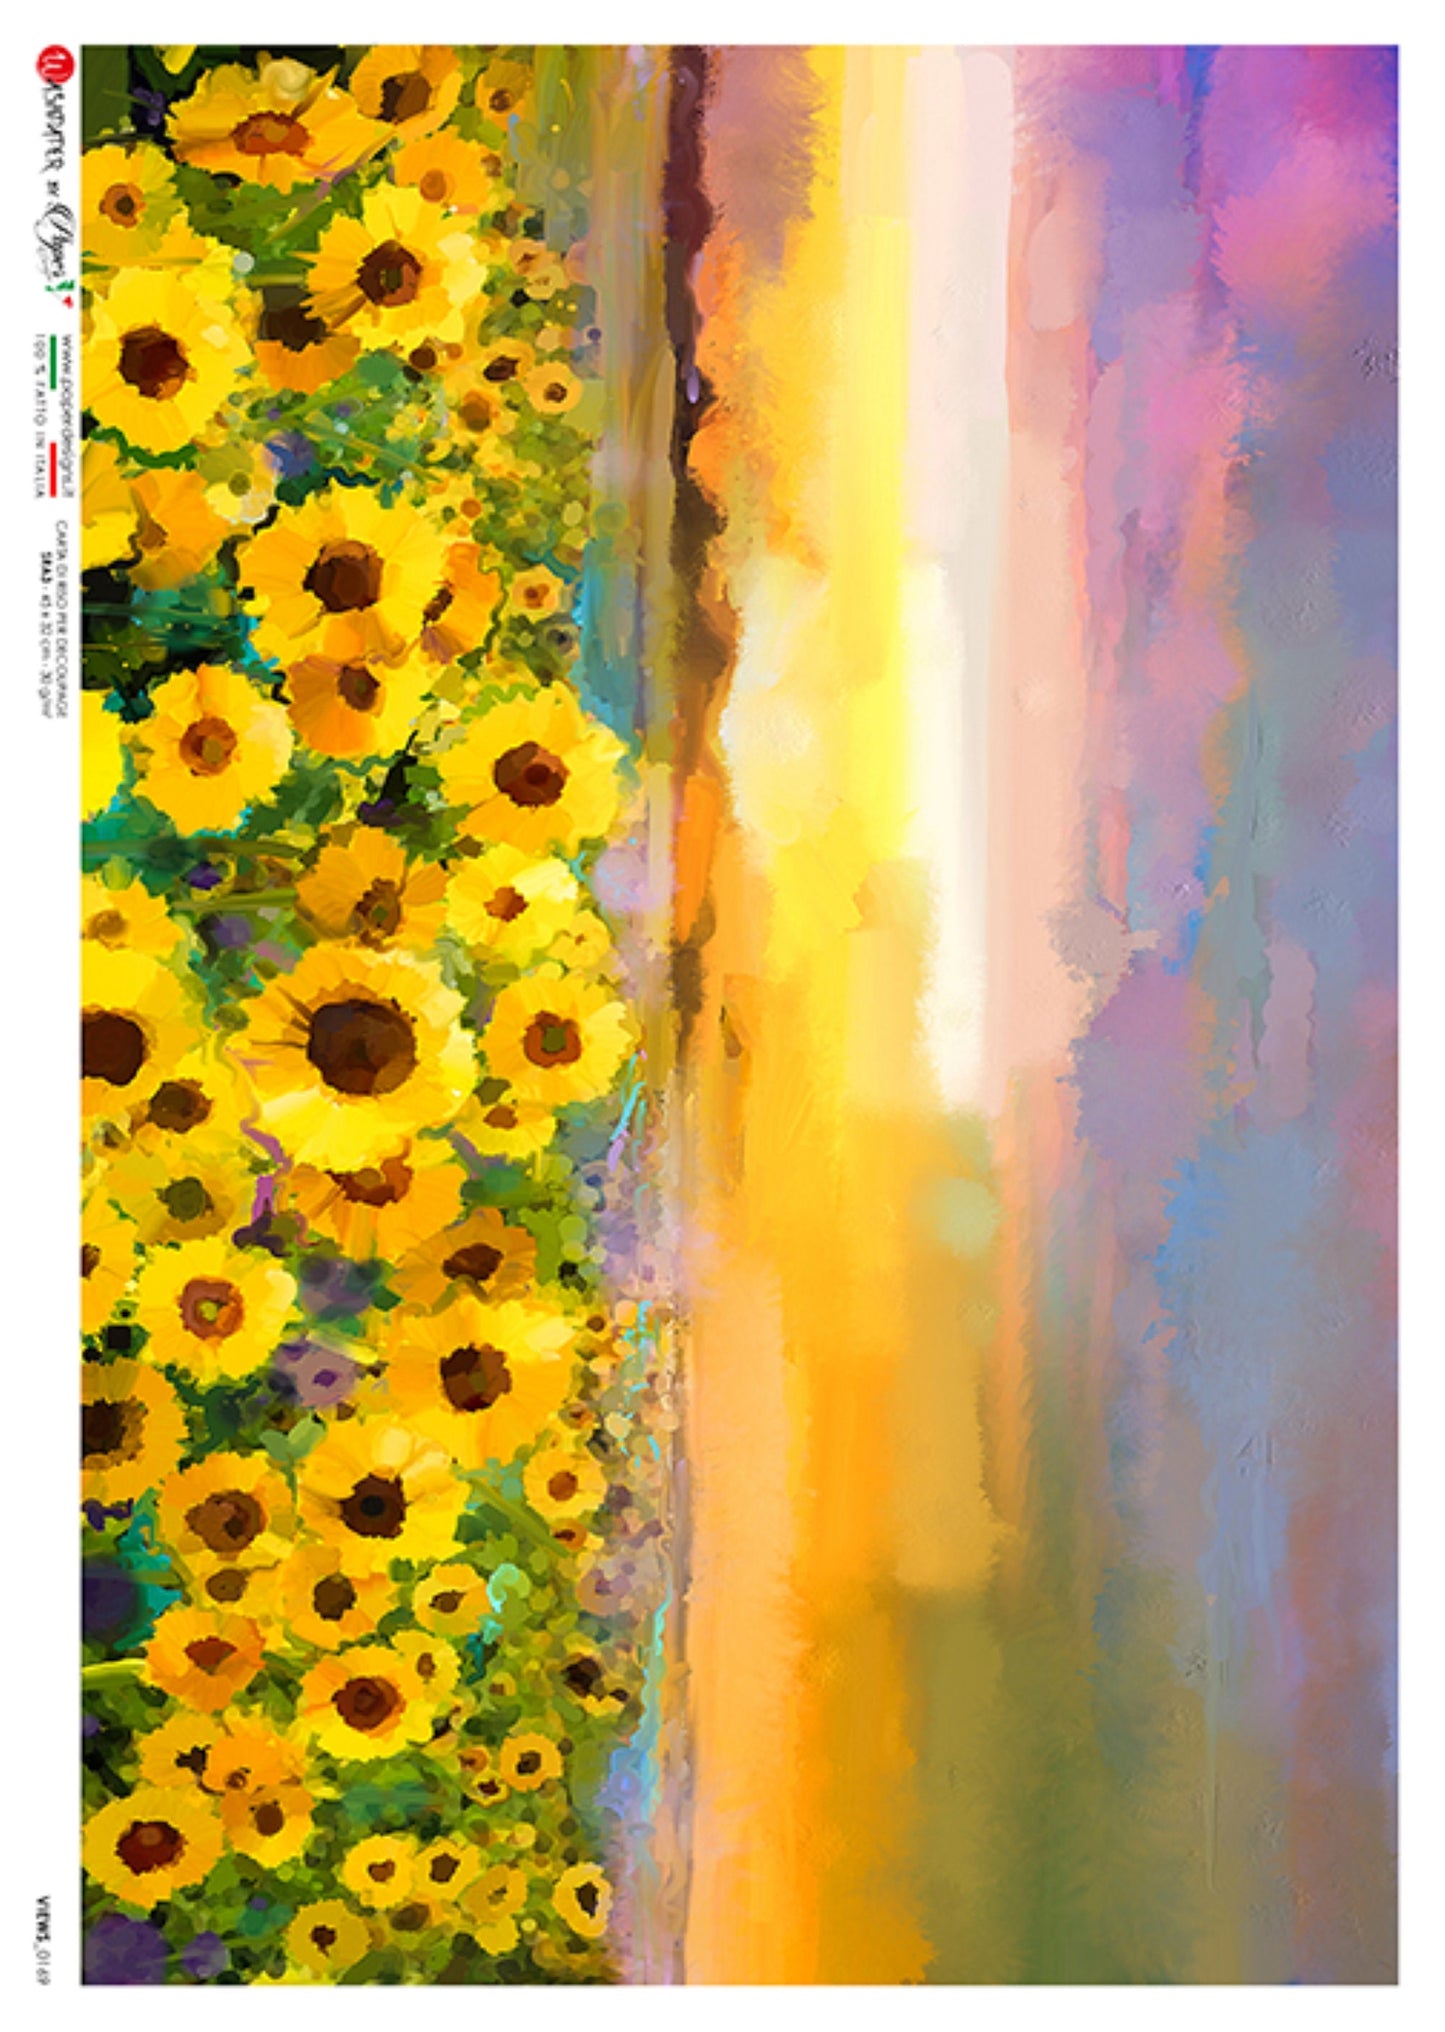 Paper Designs. Sunflowers. Sunset Views. 0169-A4 Size: A4 - 8.3" X 11.7" Rice Paper for Decoupage